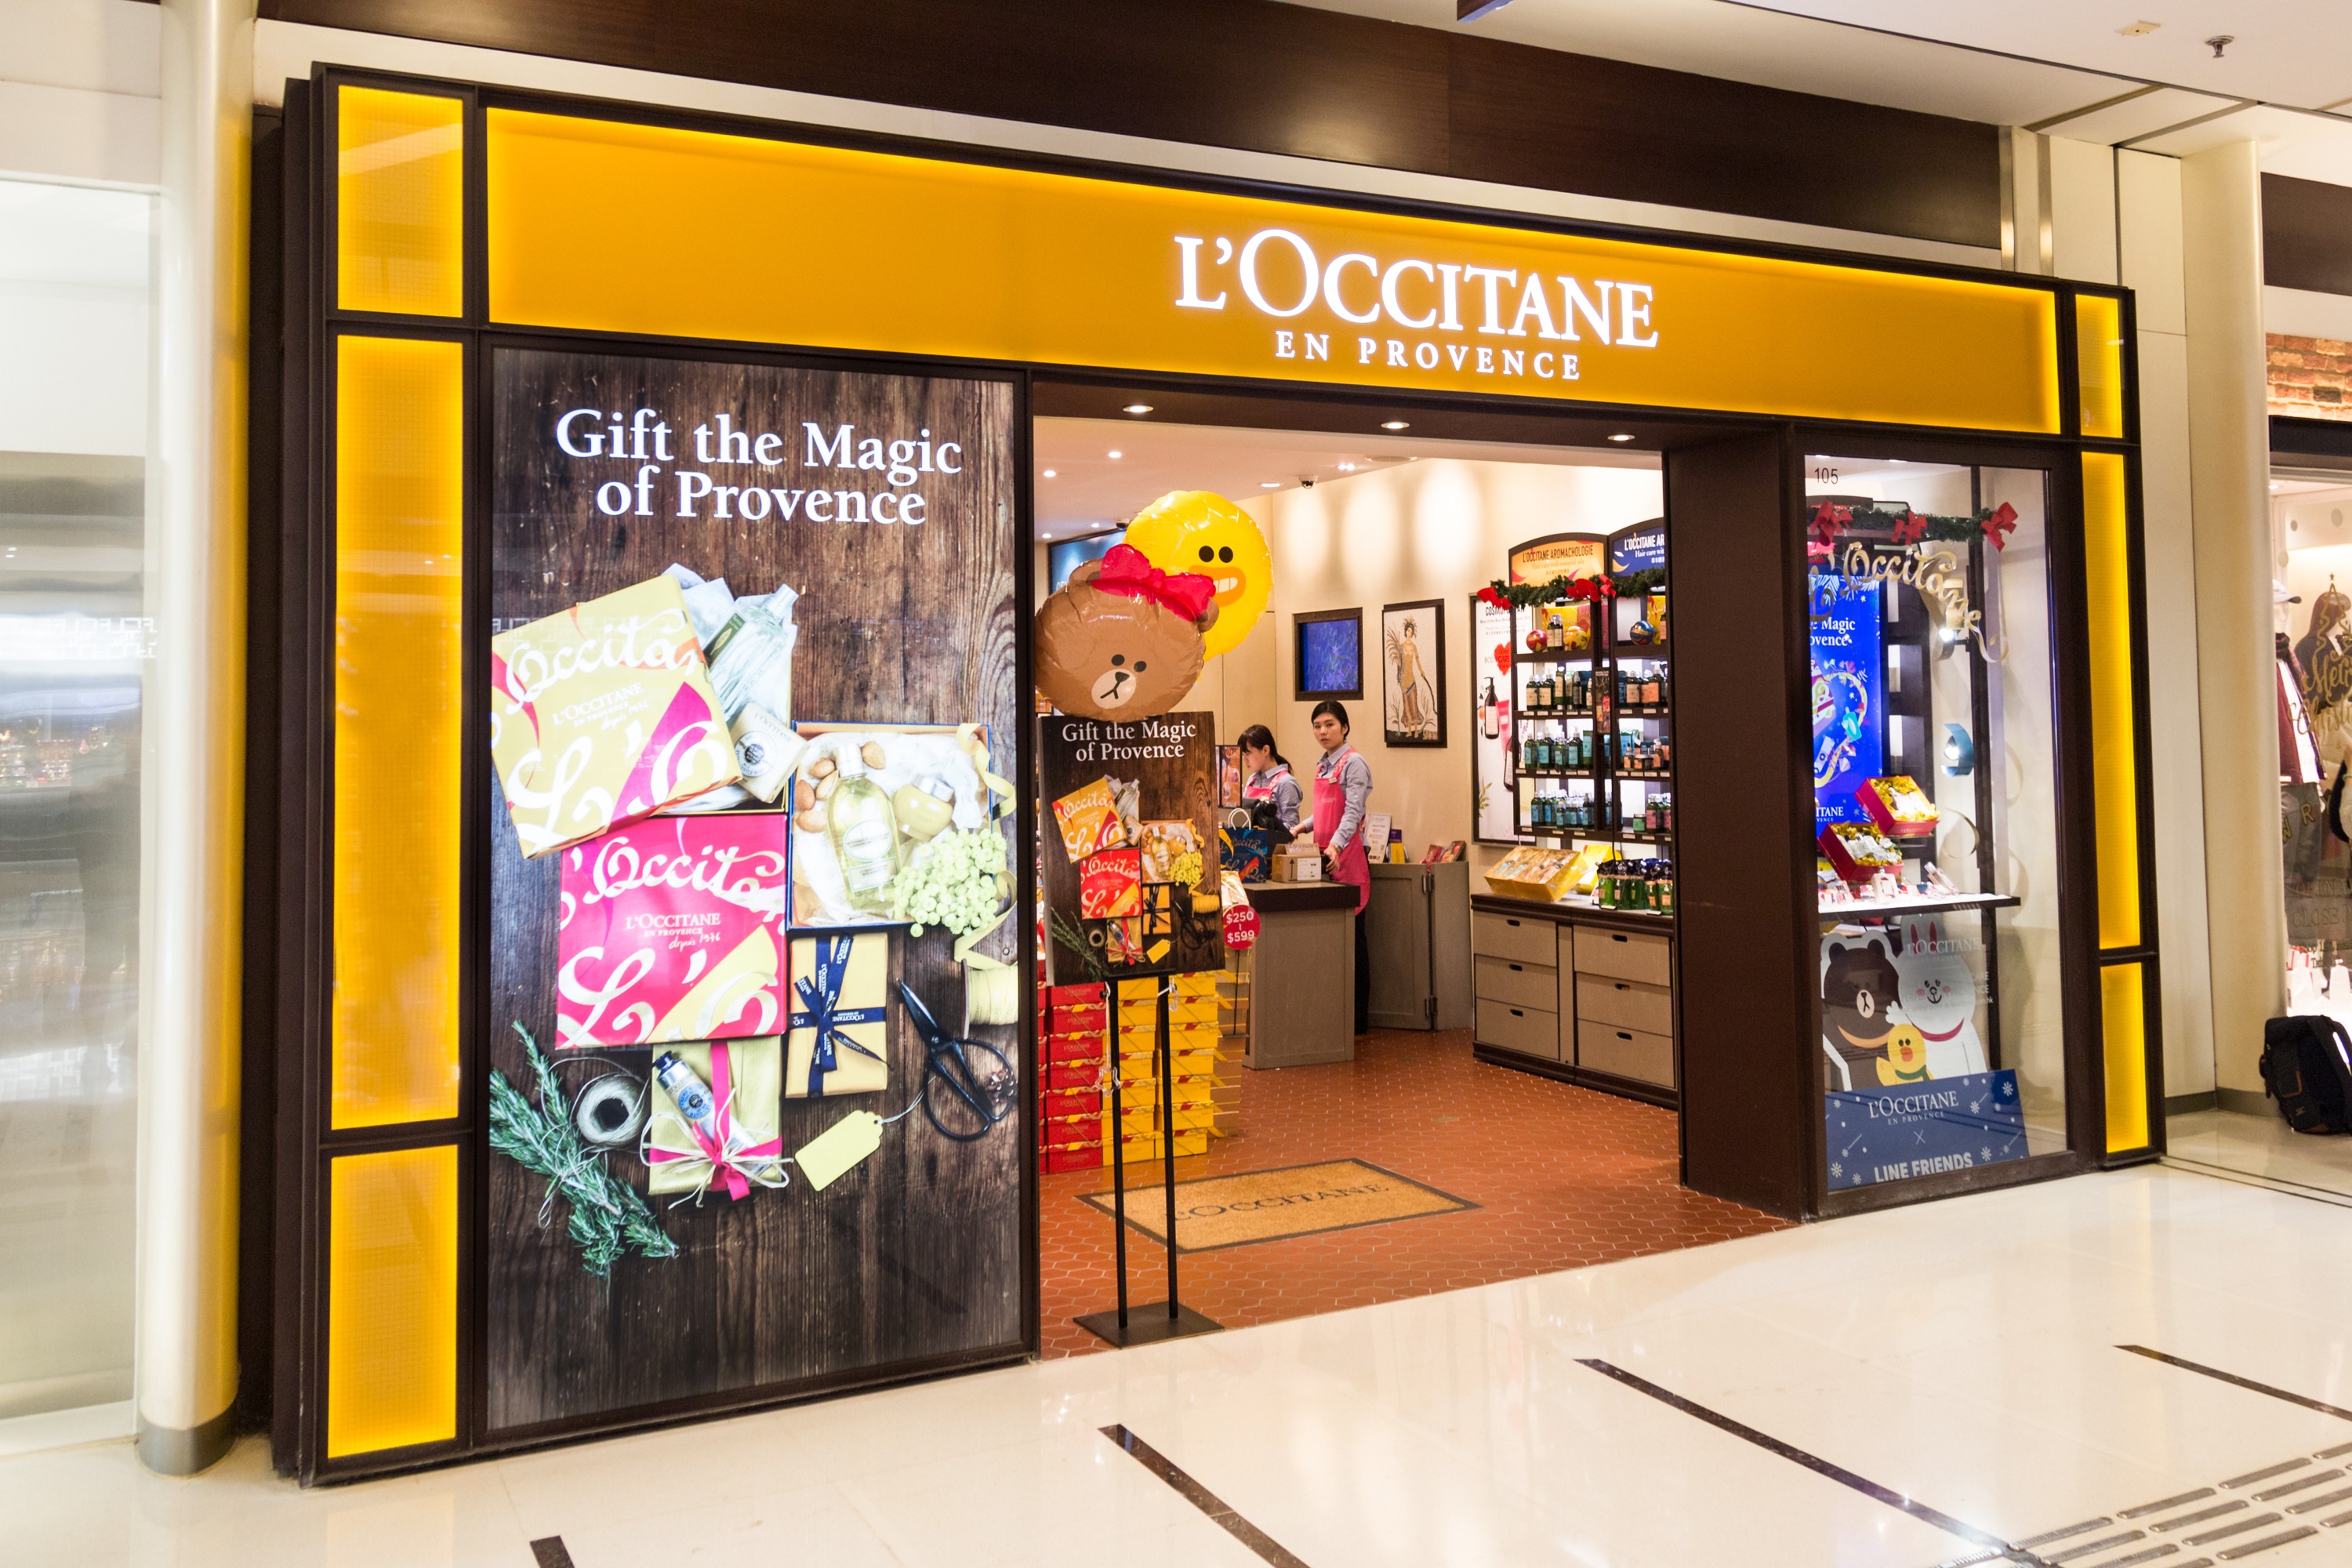 L’Occitane is an international retailer of body, face, fragrances and home products based in Manosque, France, with outlets in Hong Kong. Photo: Shutterstock